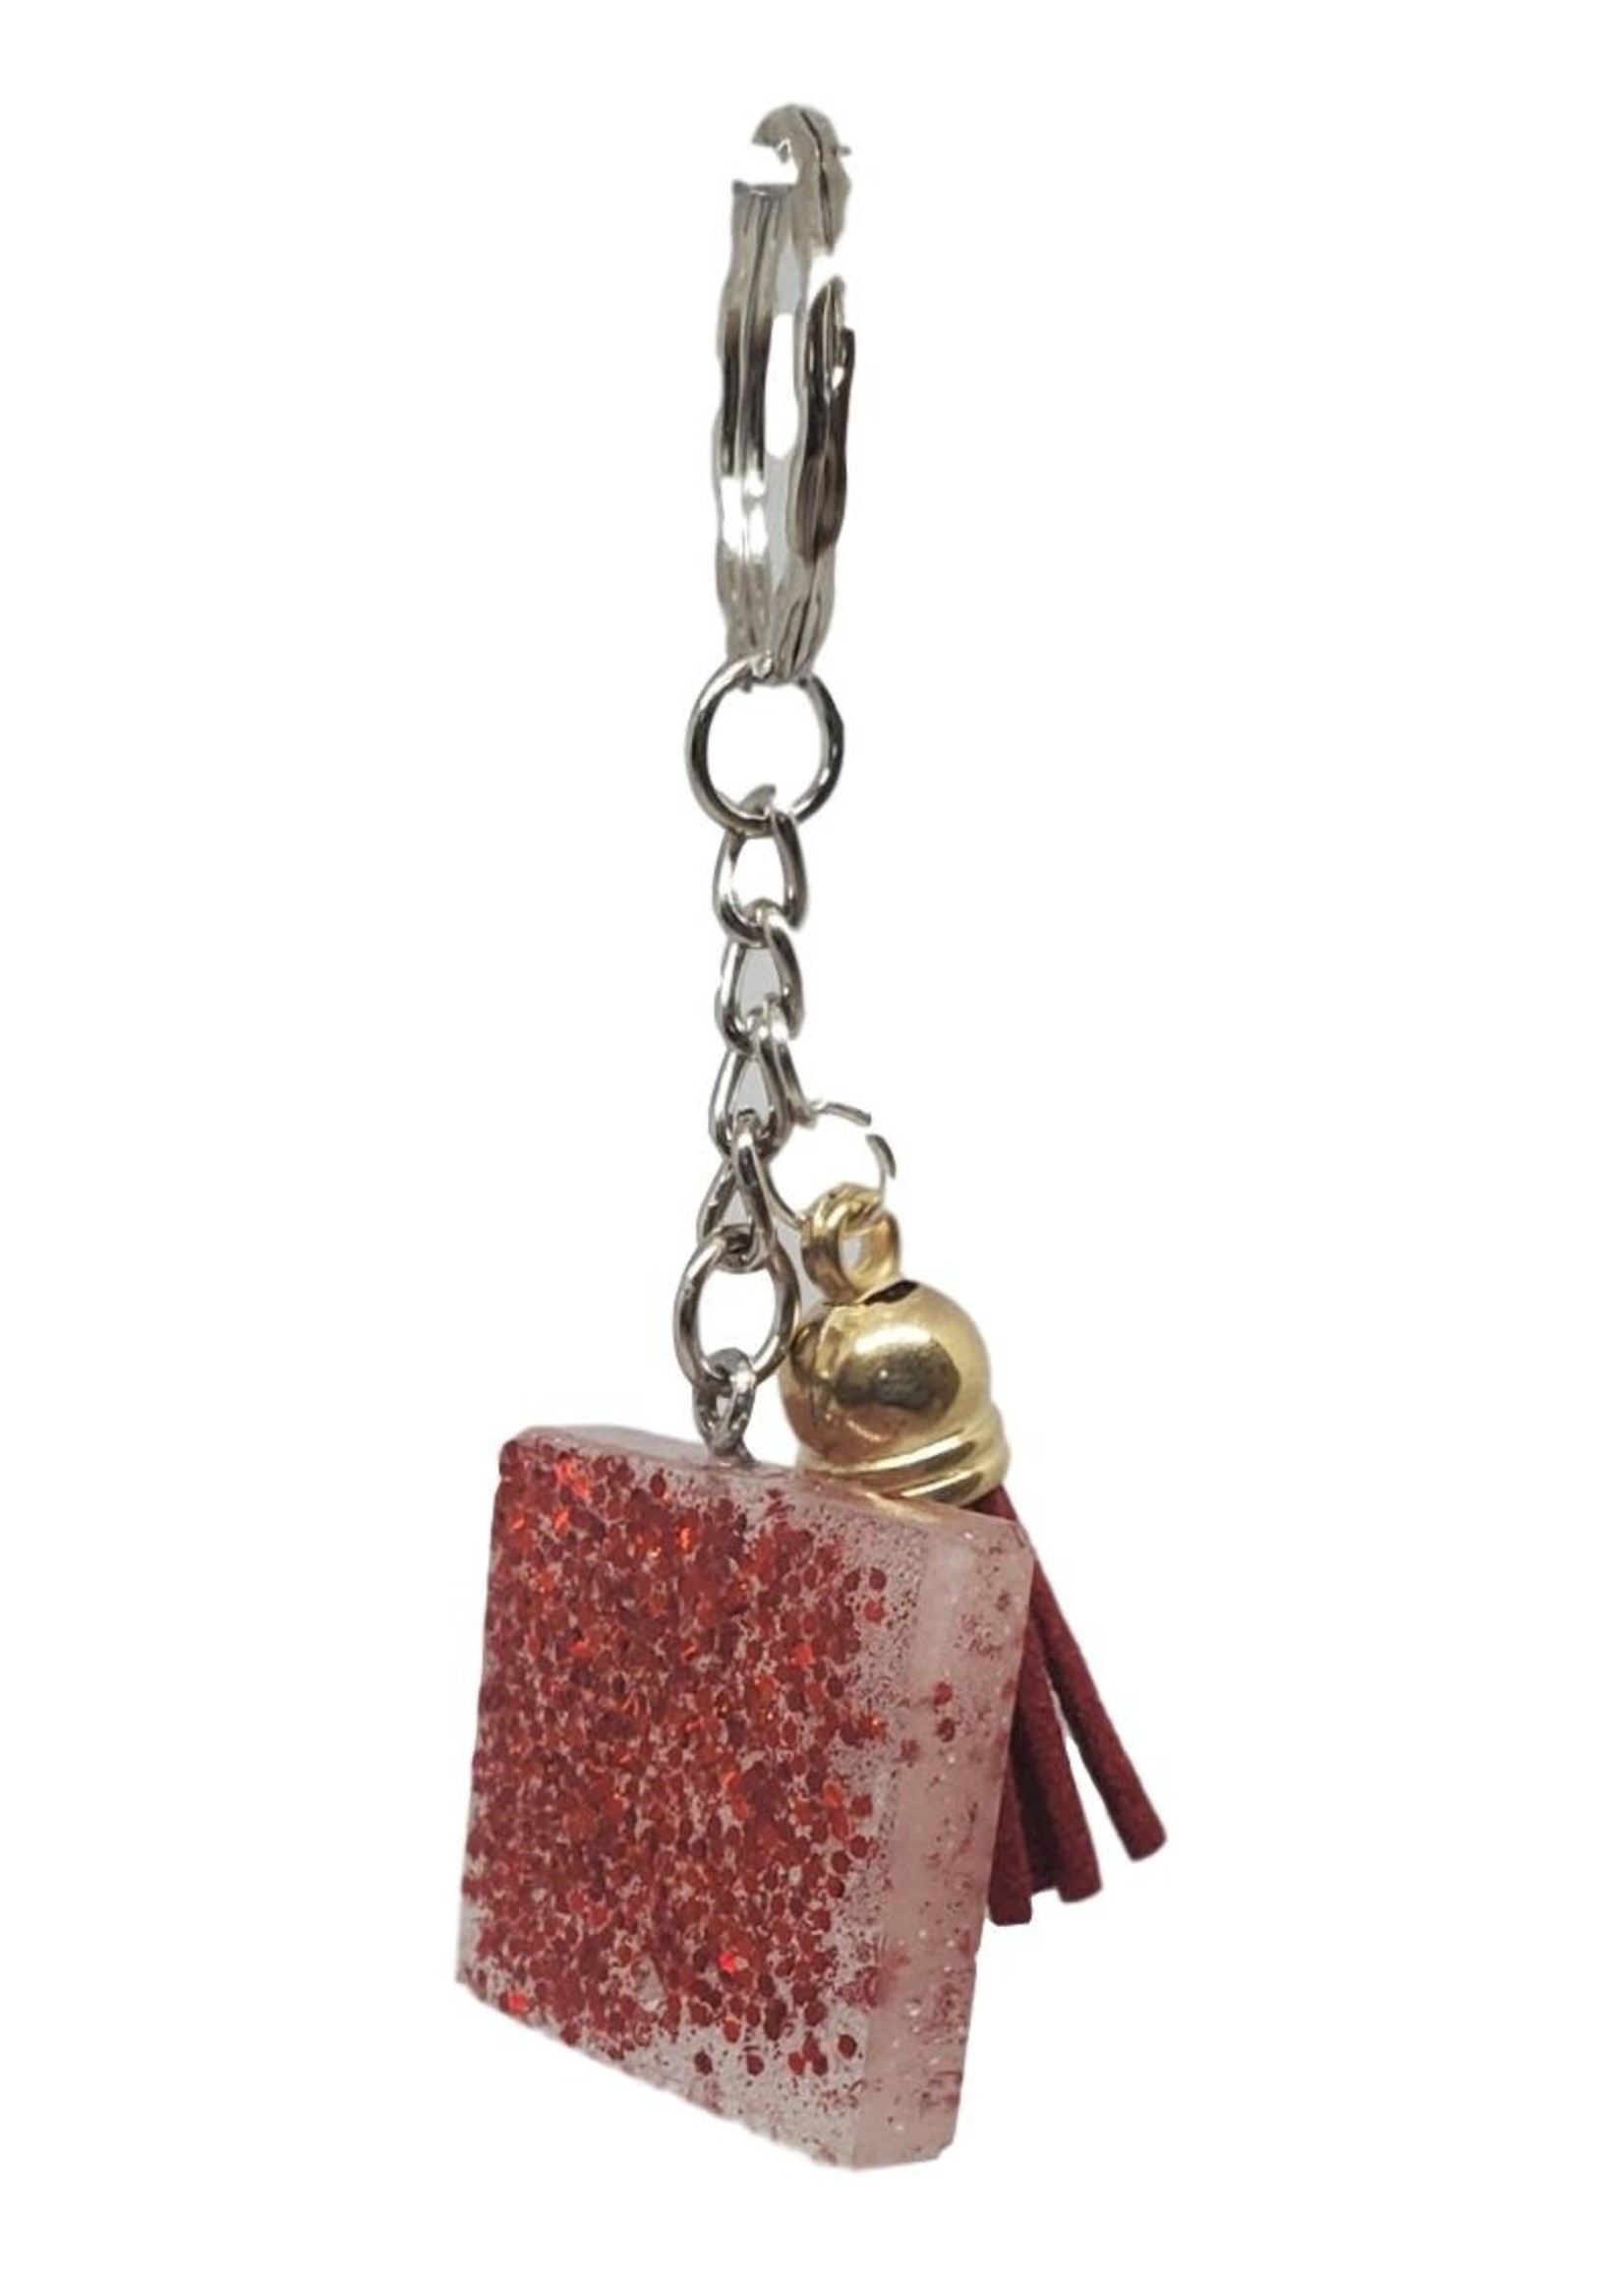 East Coast Sirens Simple Red Glitter Square Pendant Key Chain